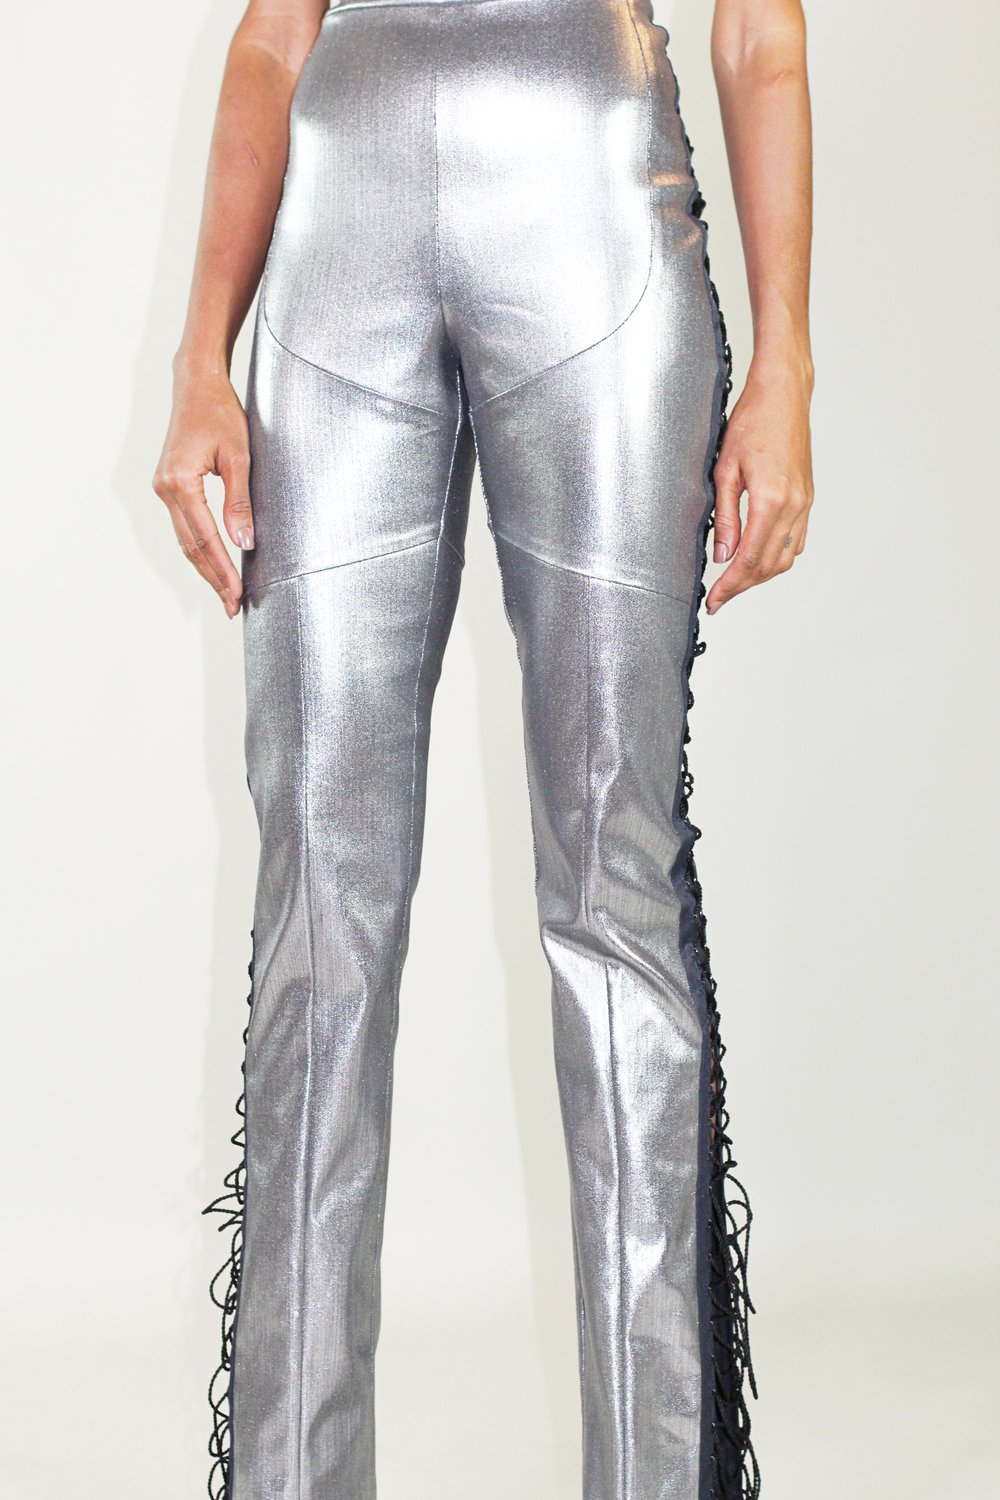 Image of Silver Denim Chaps